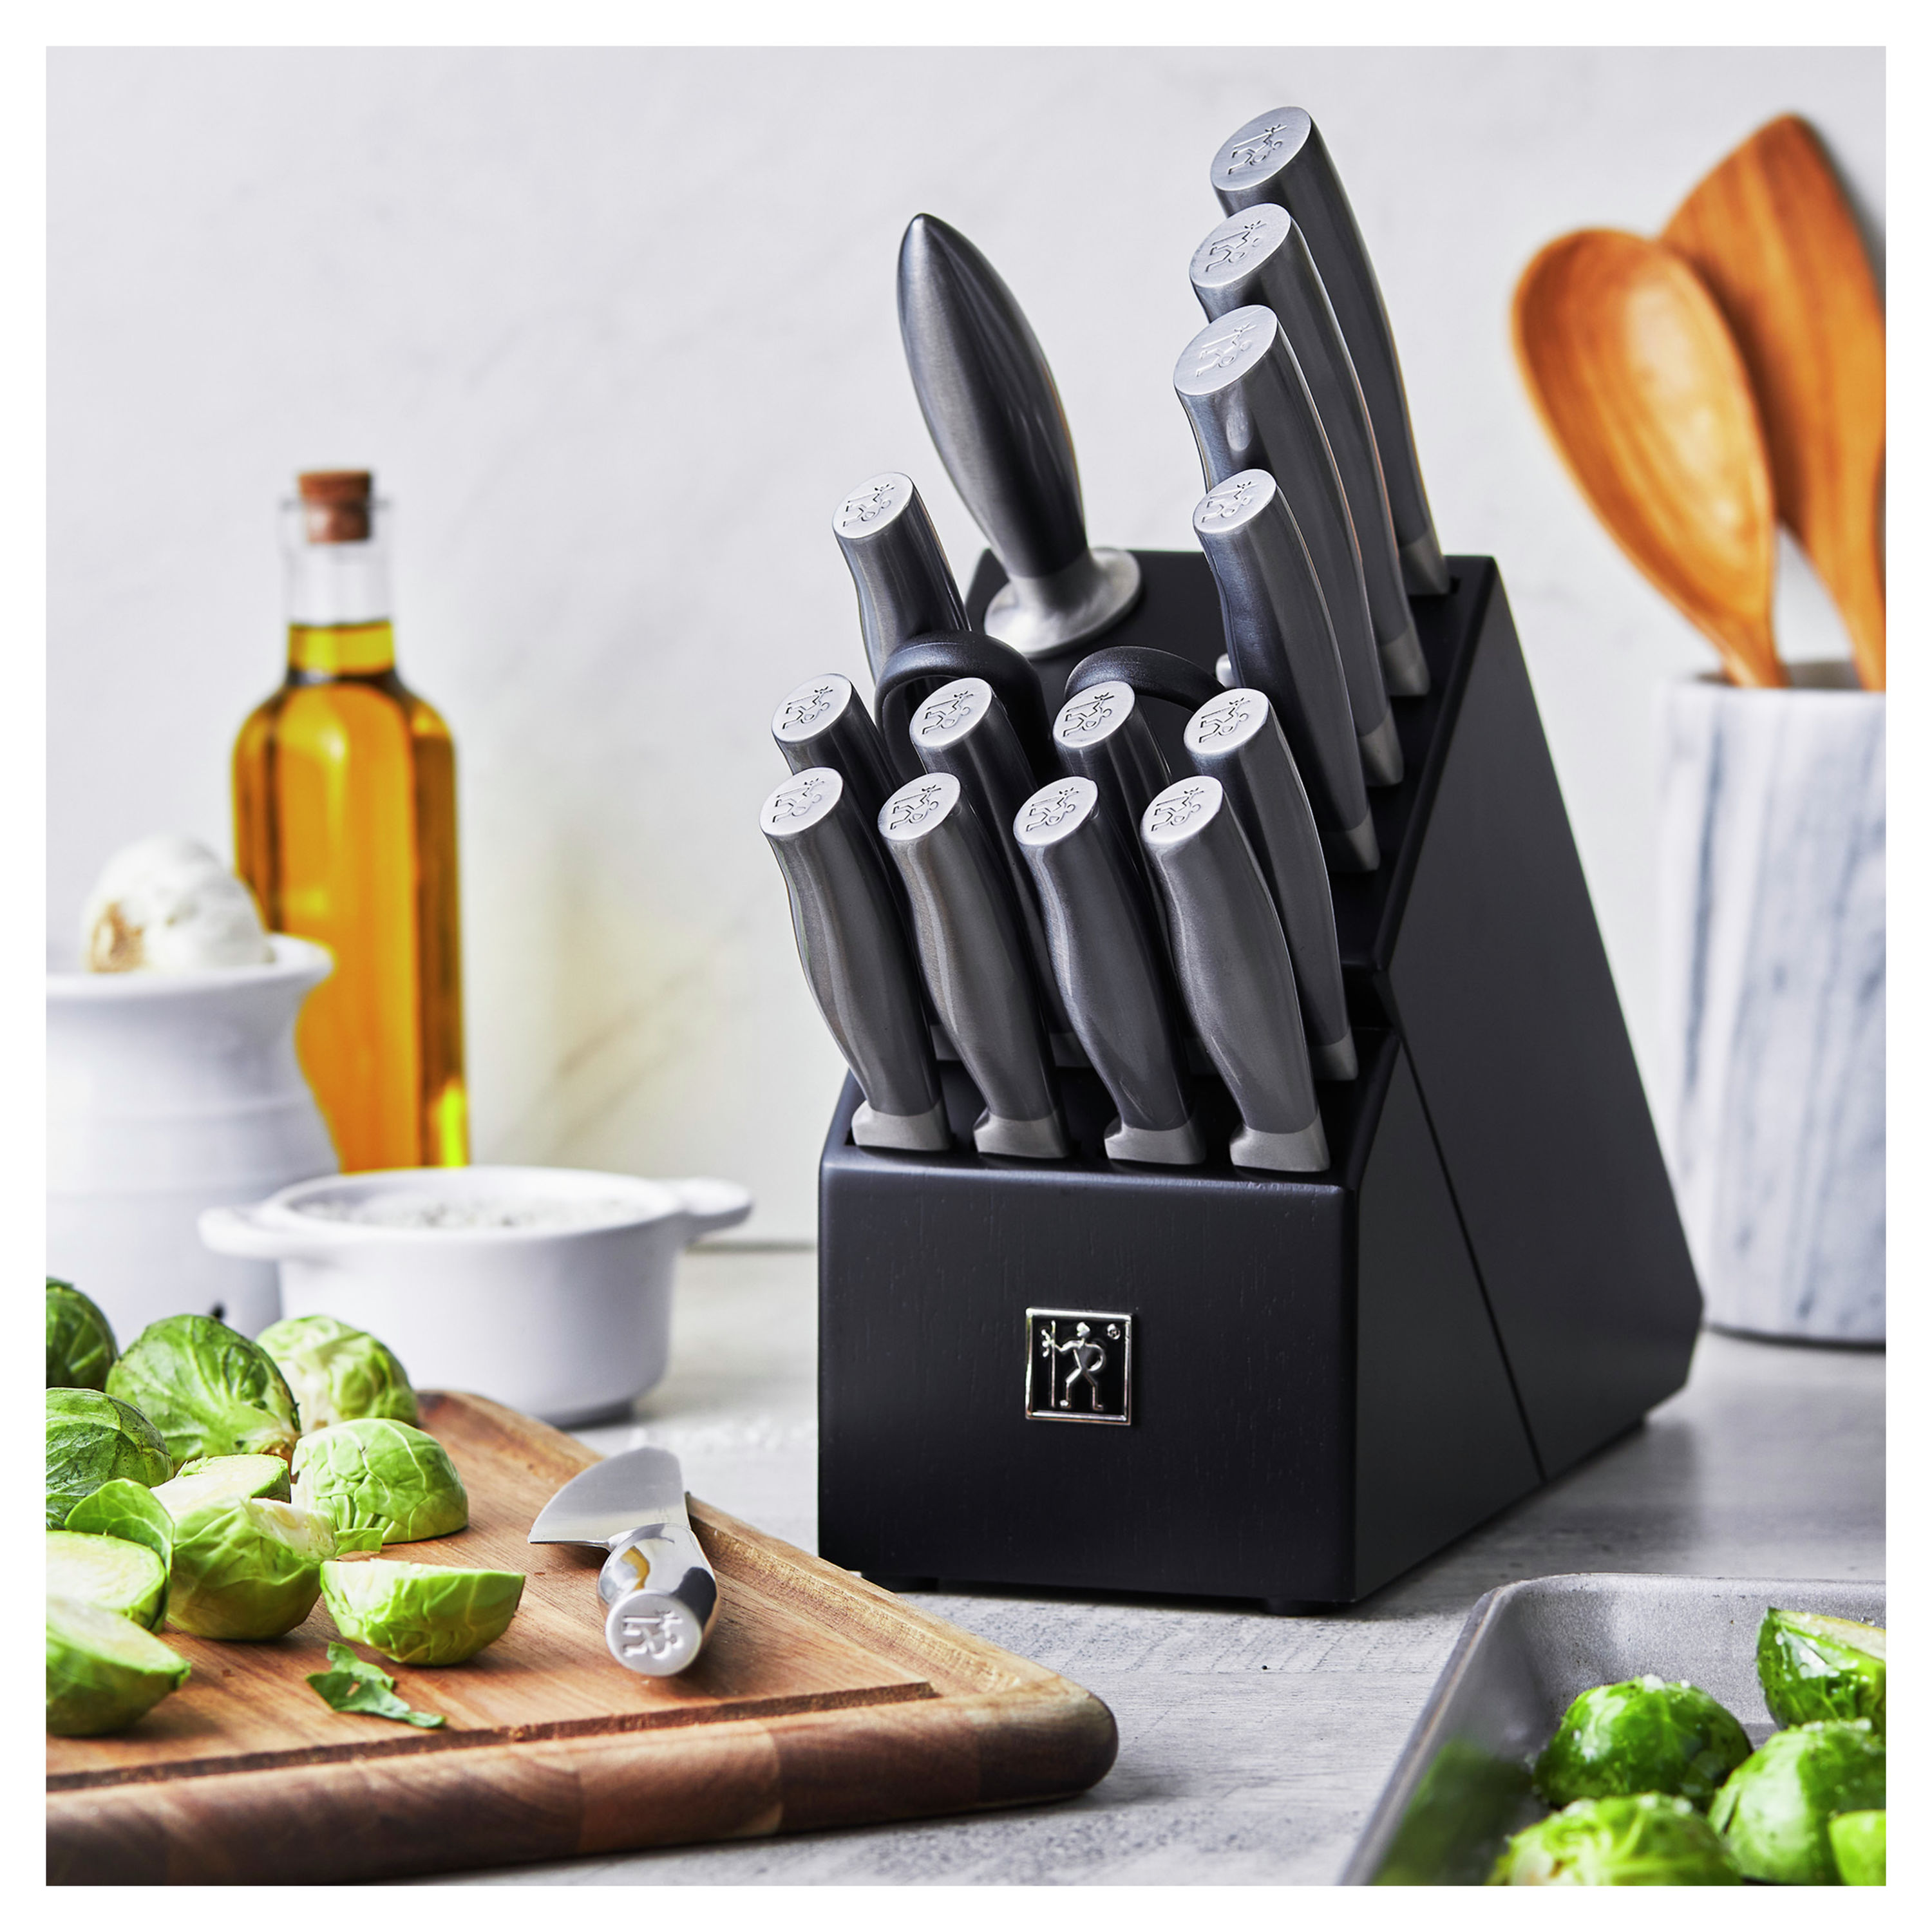 Henckels Graphite 18-pc Knife Block set, 18-pc - Fry's Food Stores